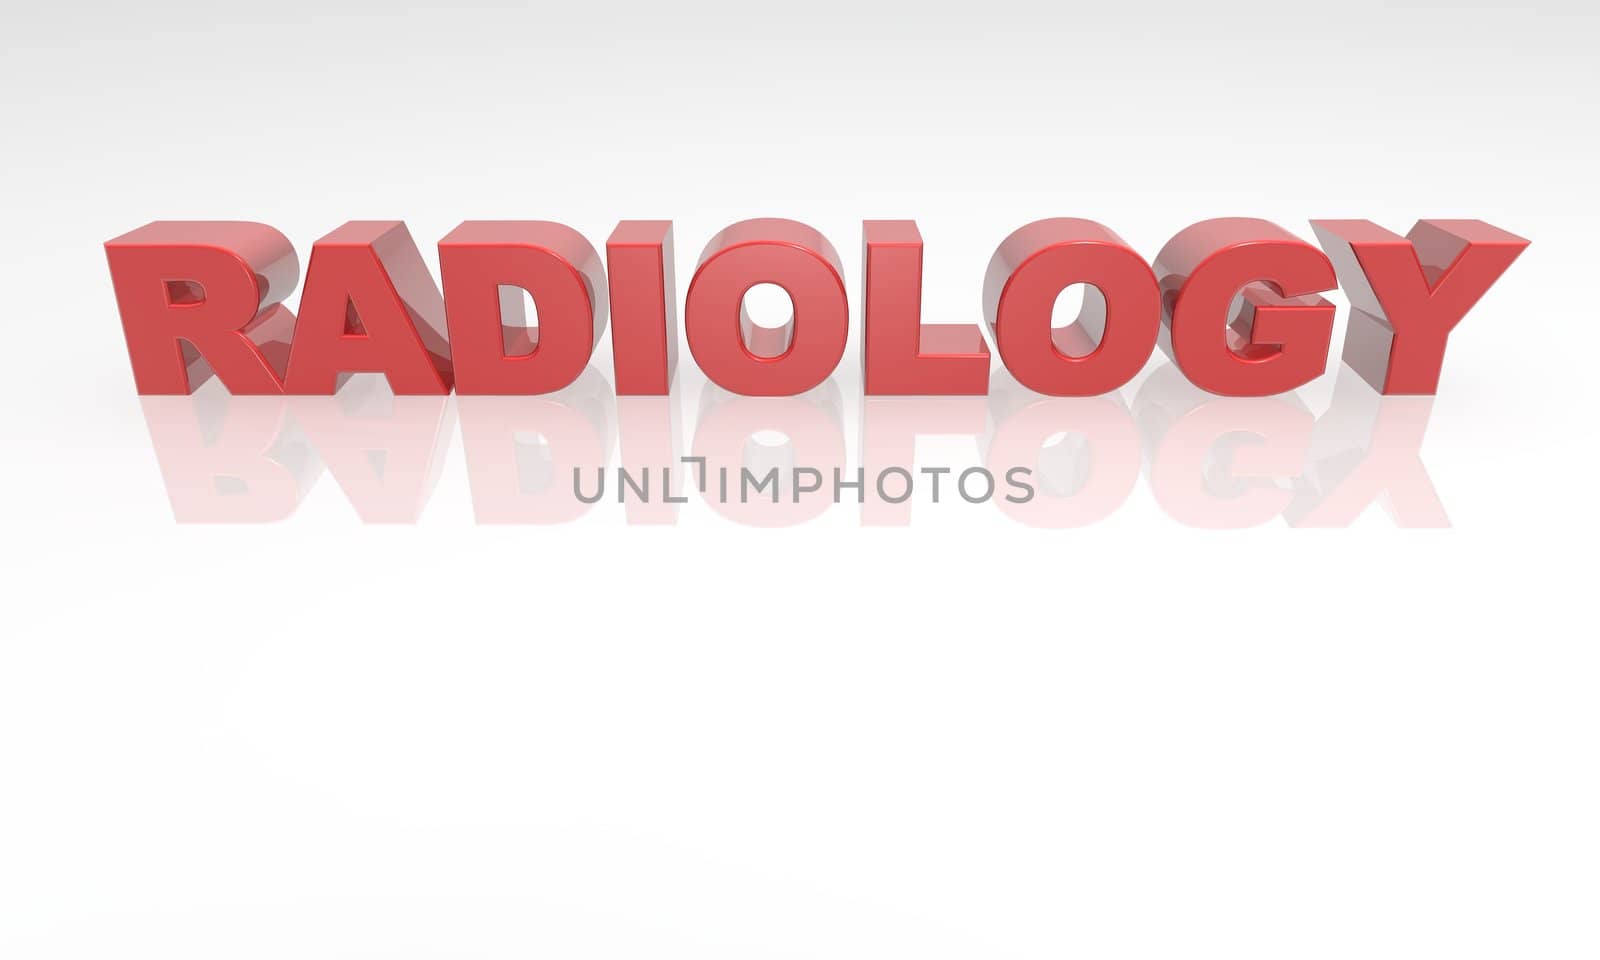 3d radiology red text reflection by jeremywhat